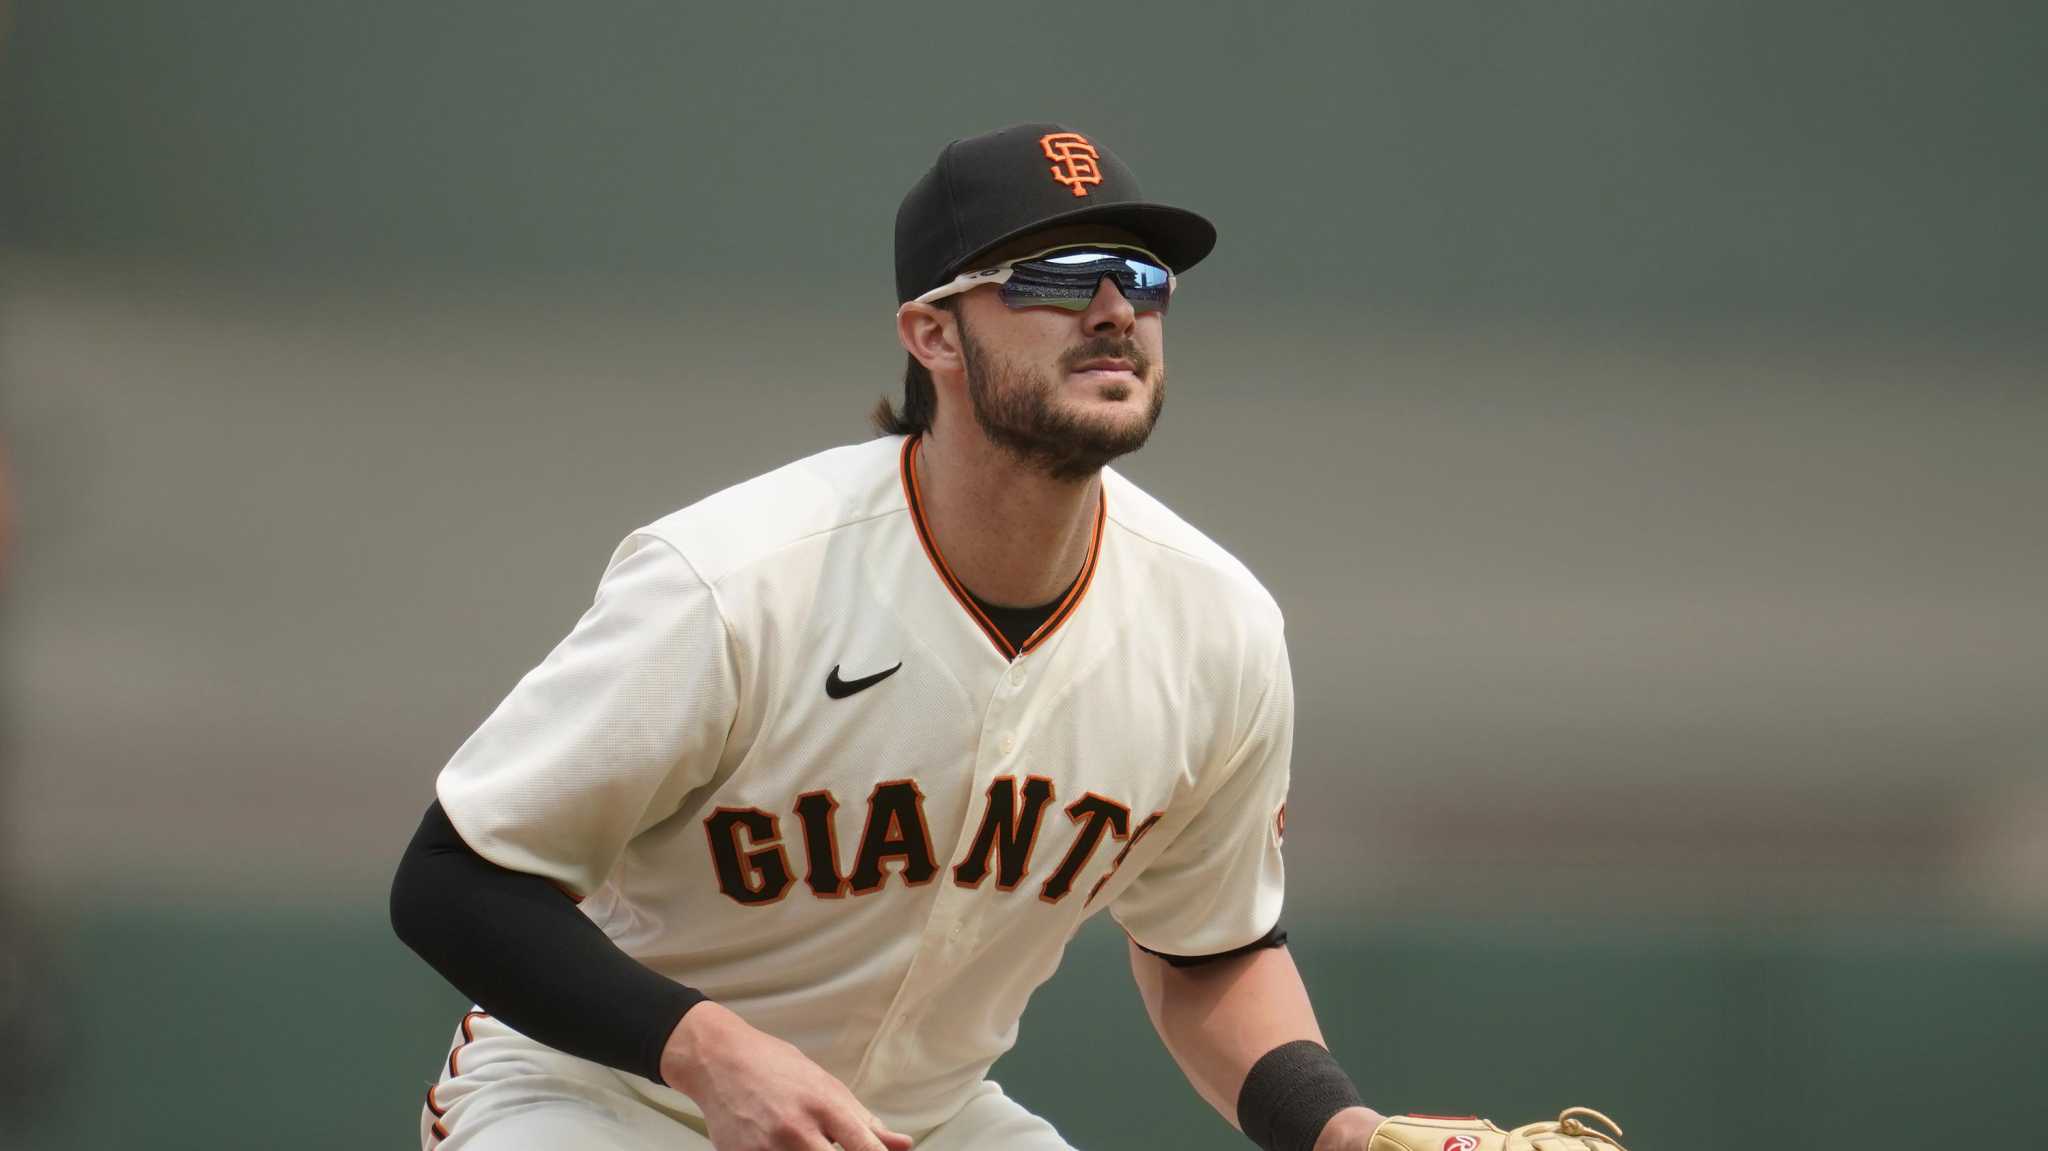 Kris Bryant Reacts to Being Traded to San Francisco Giants